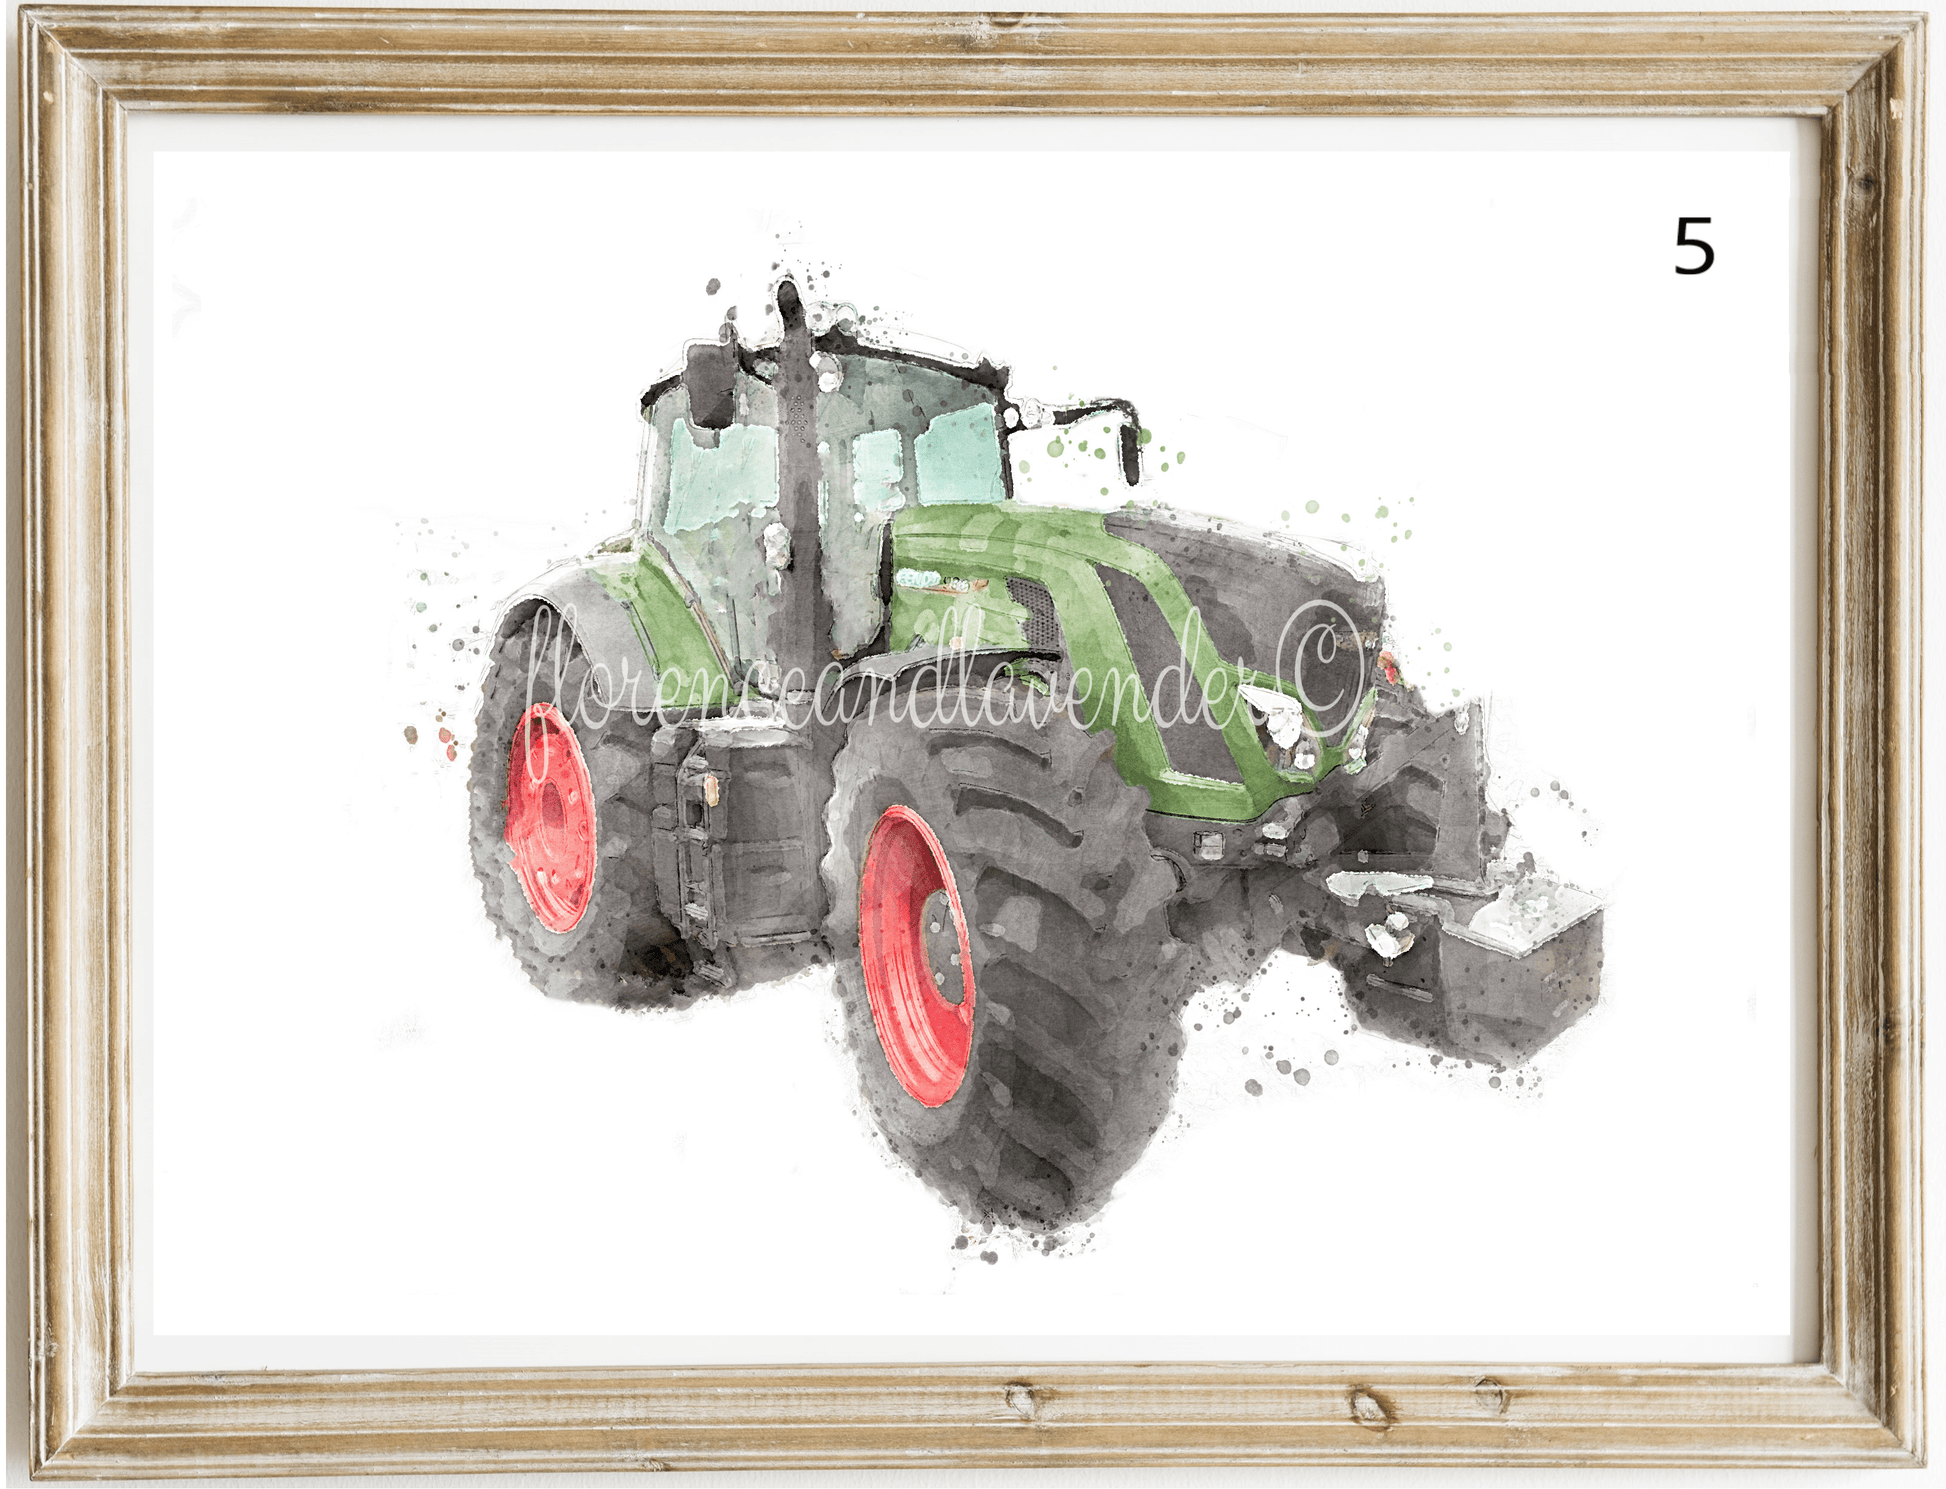 Tractor Prints Collection - Florence & Lavender